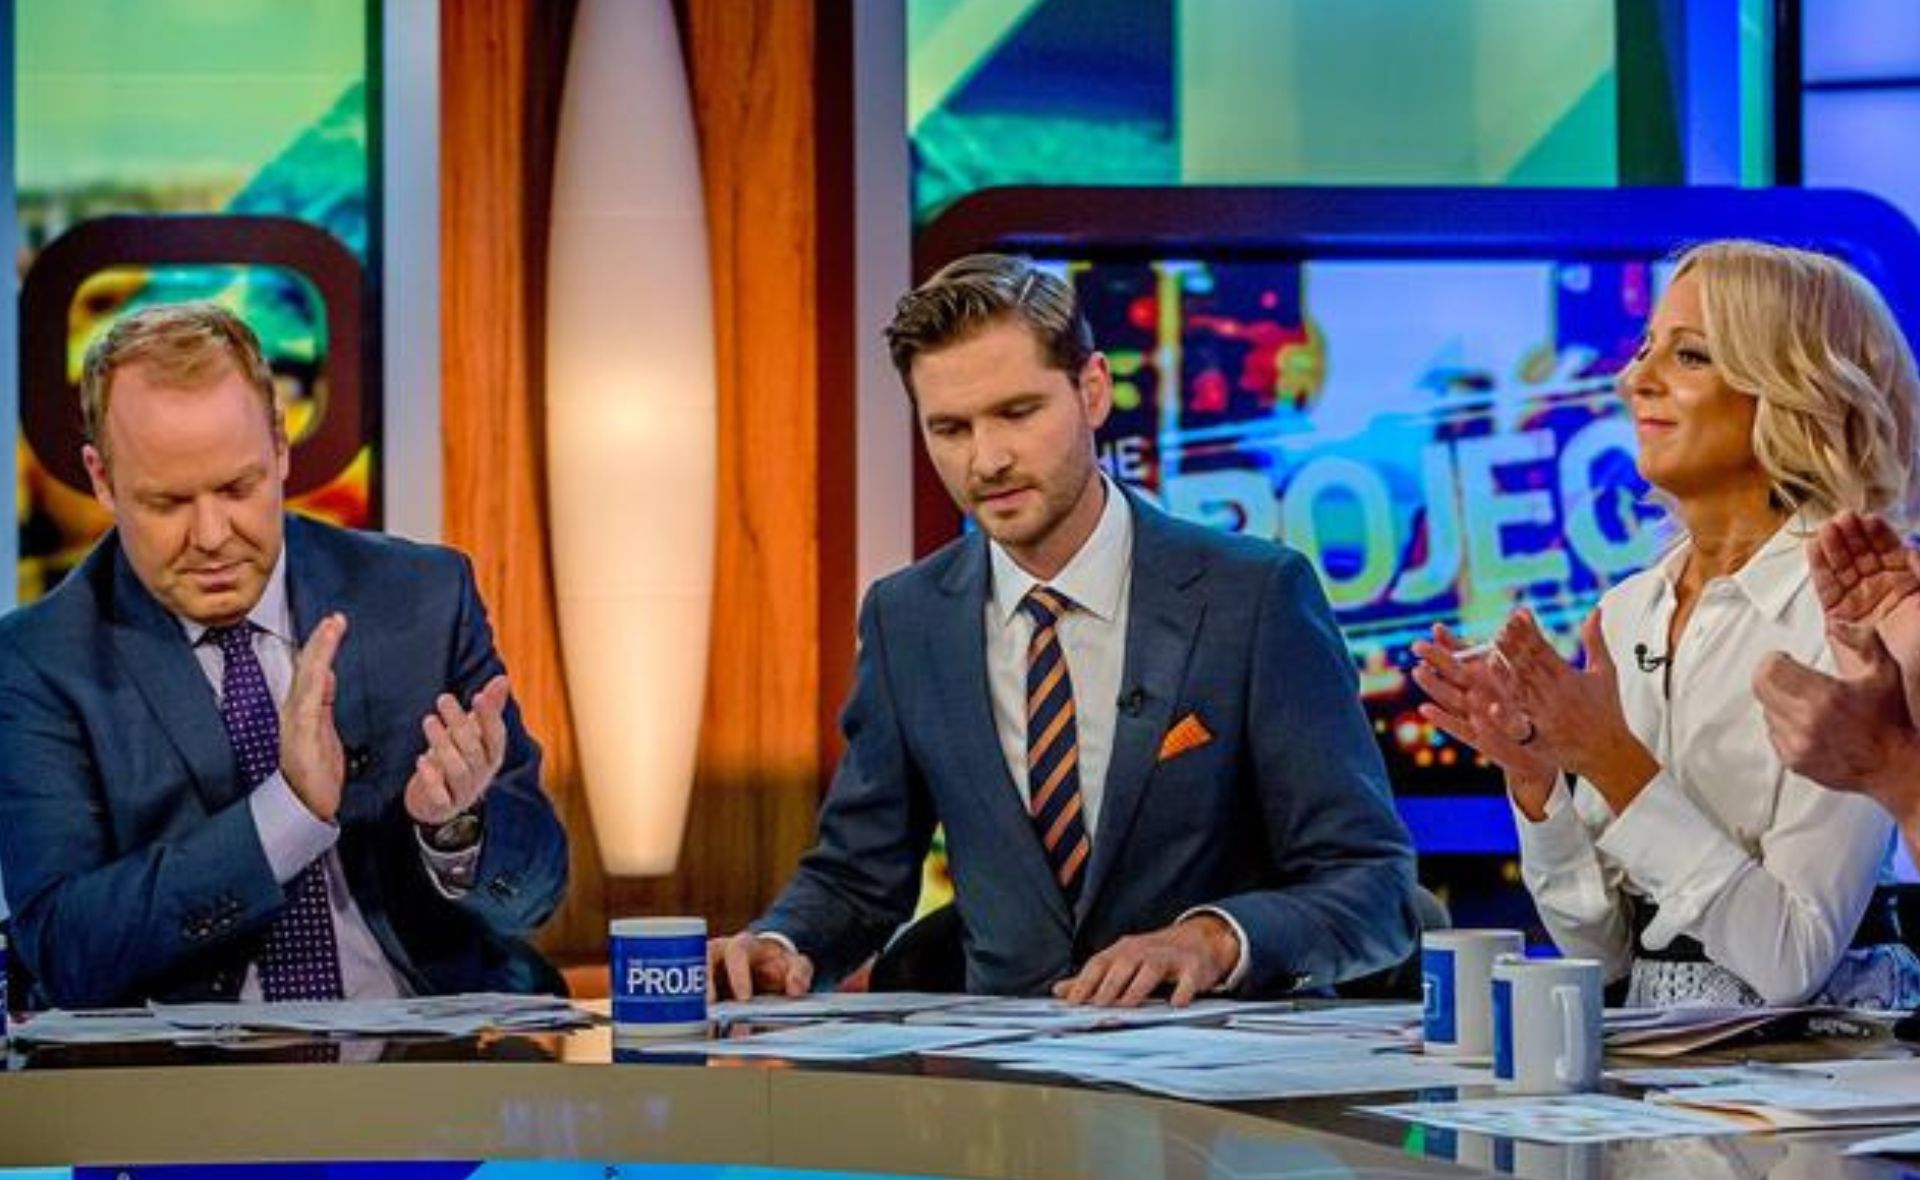 Original host of The Project, Charlie Pickering, makes surprise return to the show